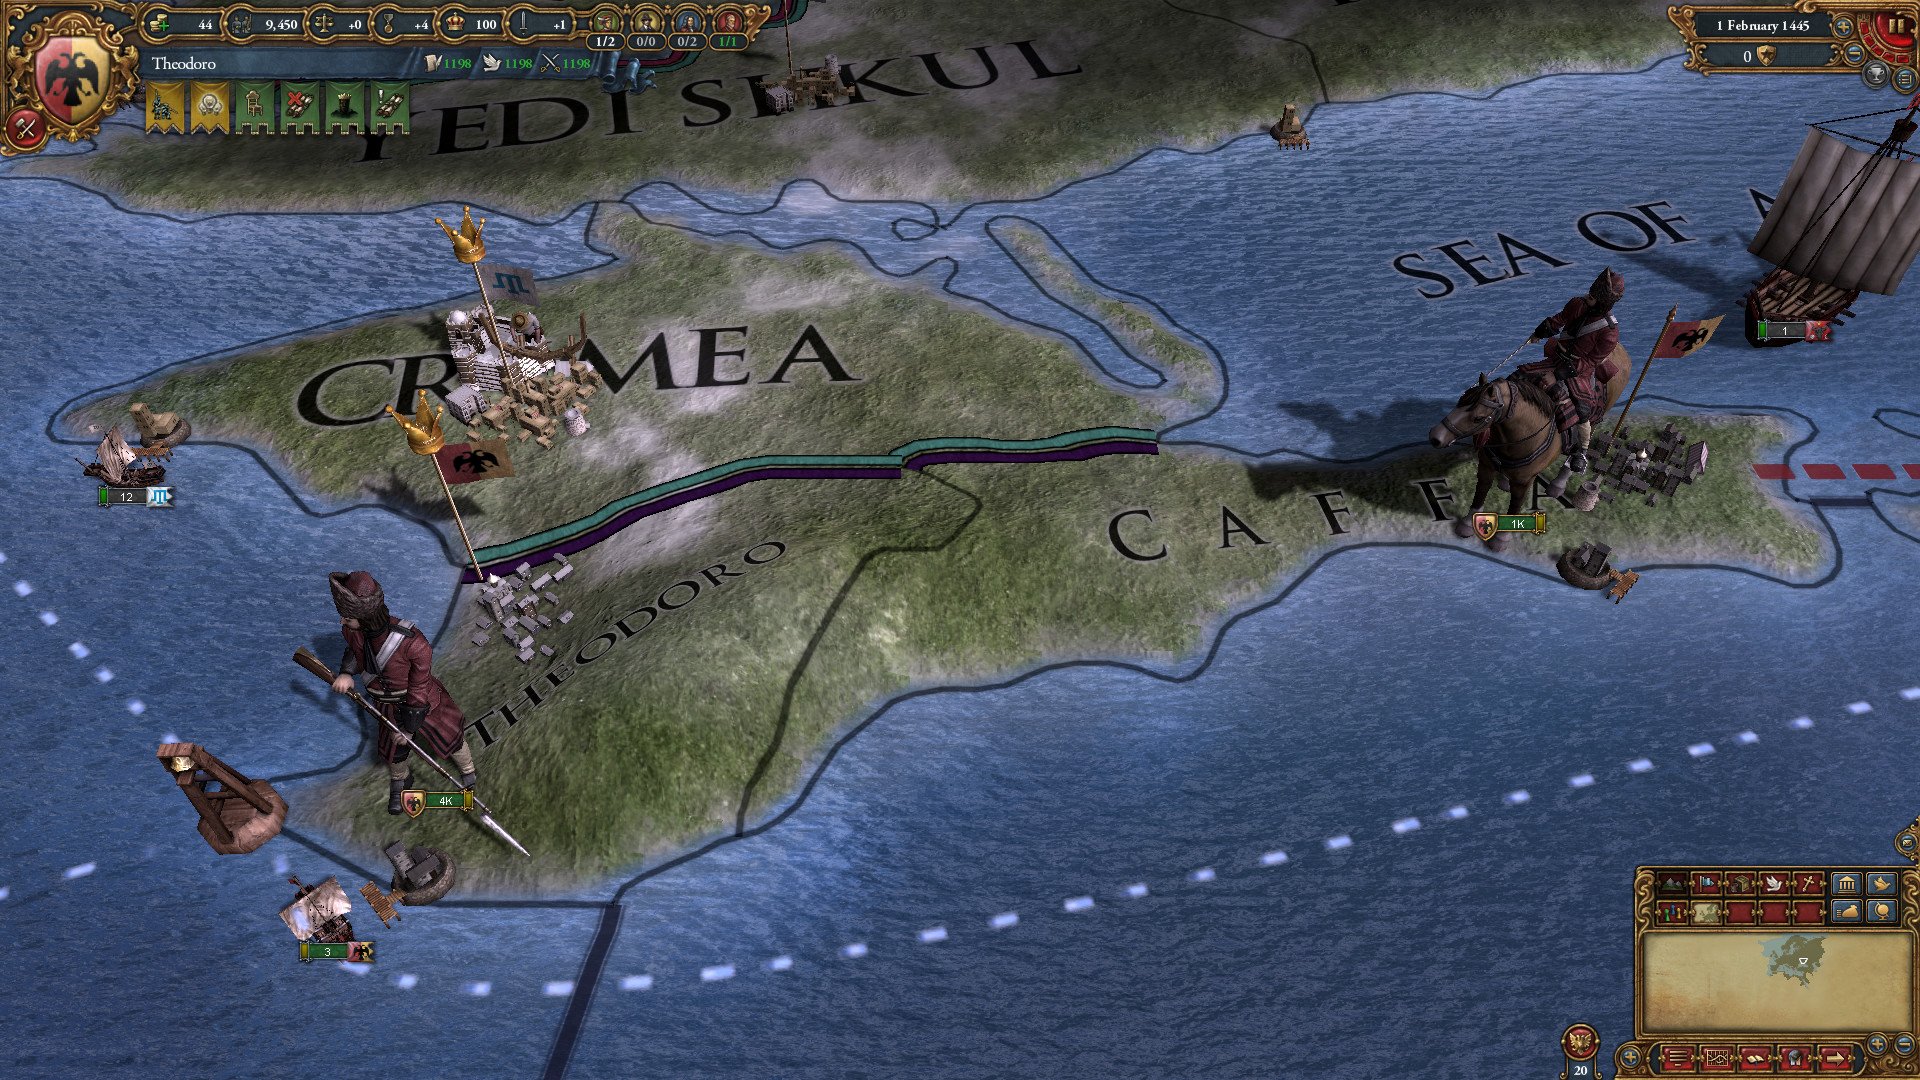 Europa Universalis IV The Cossacks Content Pack 2